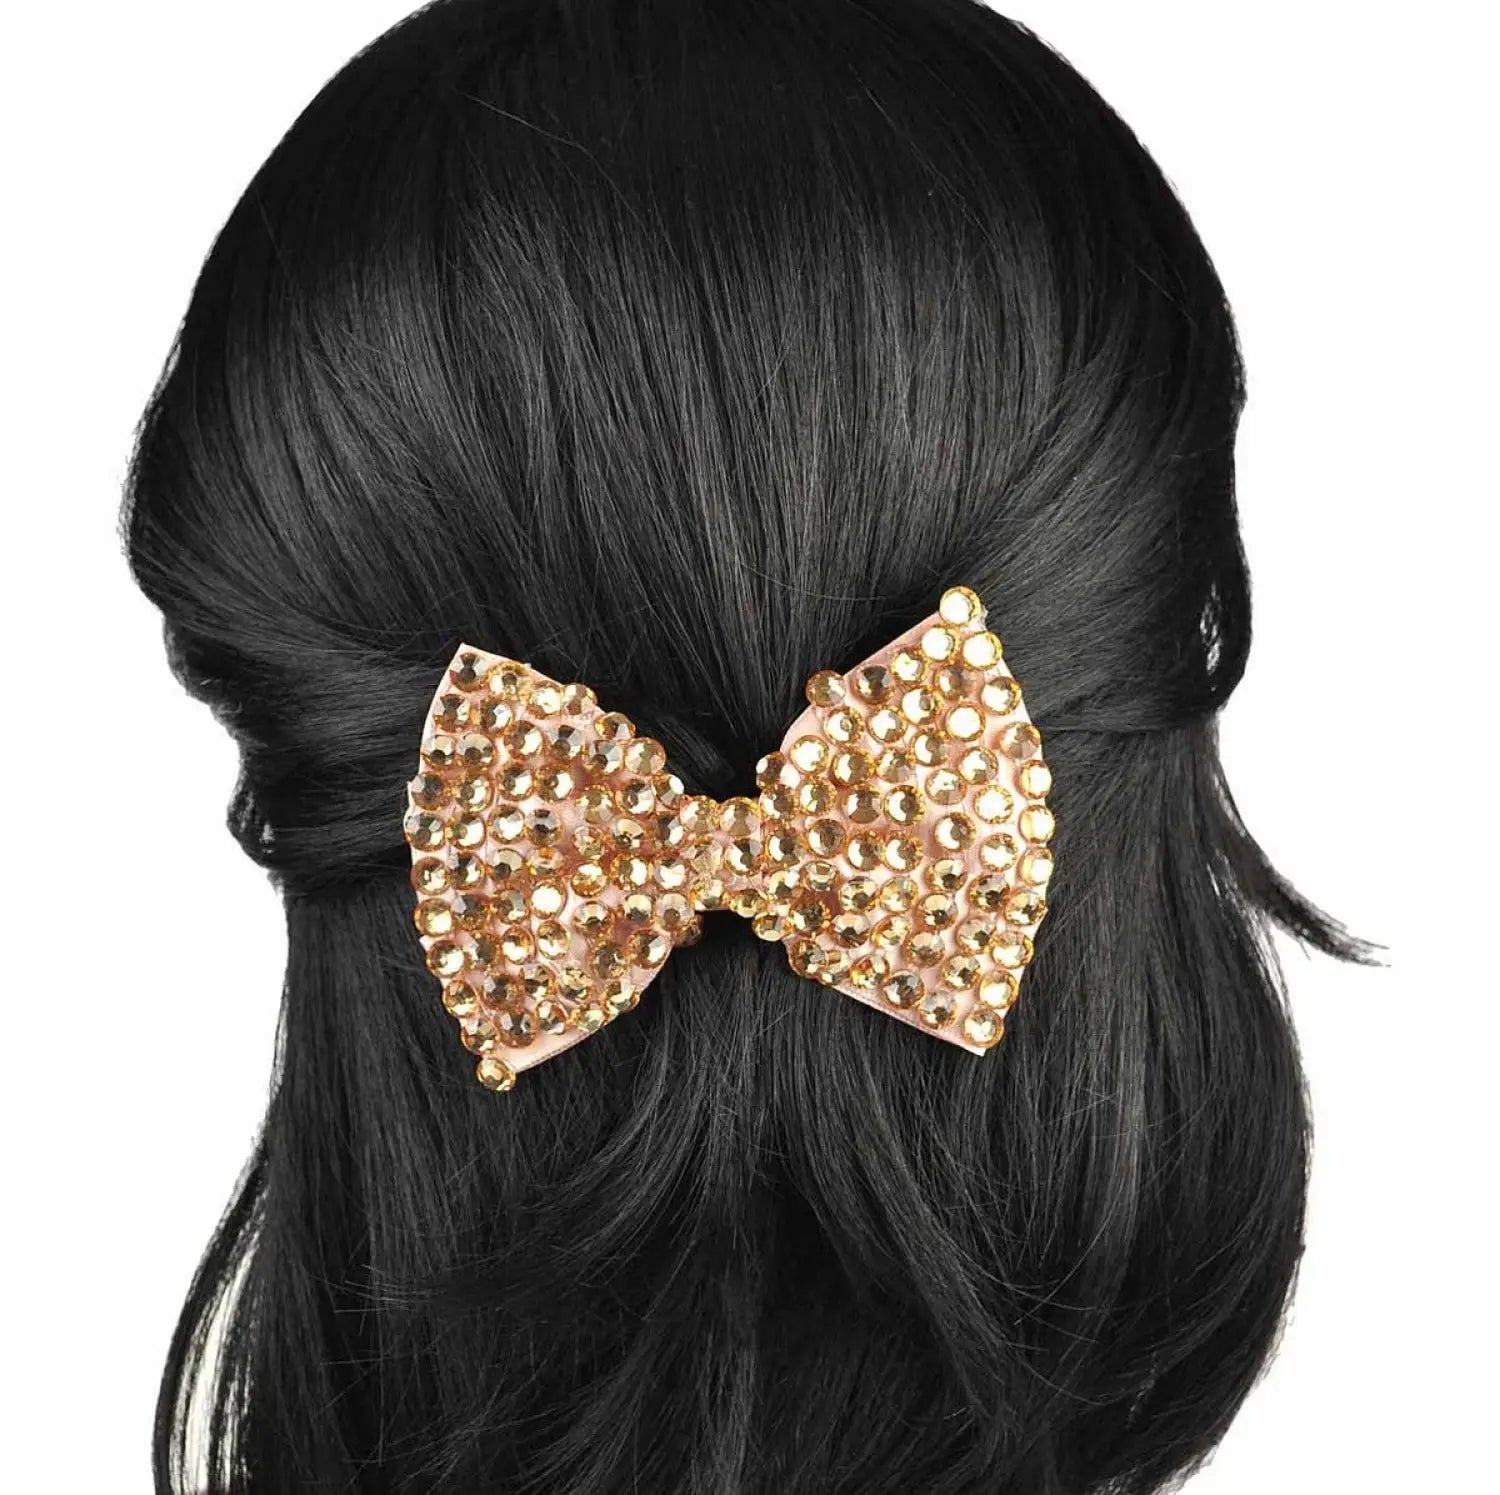 Kids Rhinestone Glittery Bows - 2pcs Crocodile Hair Clips featuring a woman with black hair and a gold bow